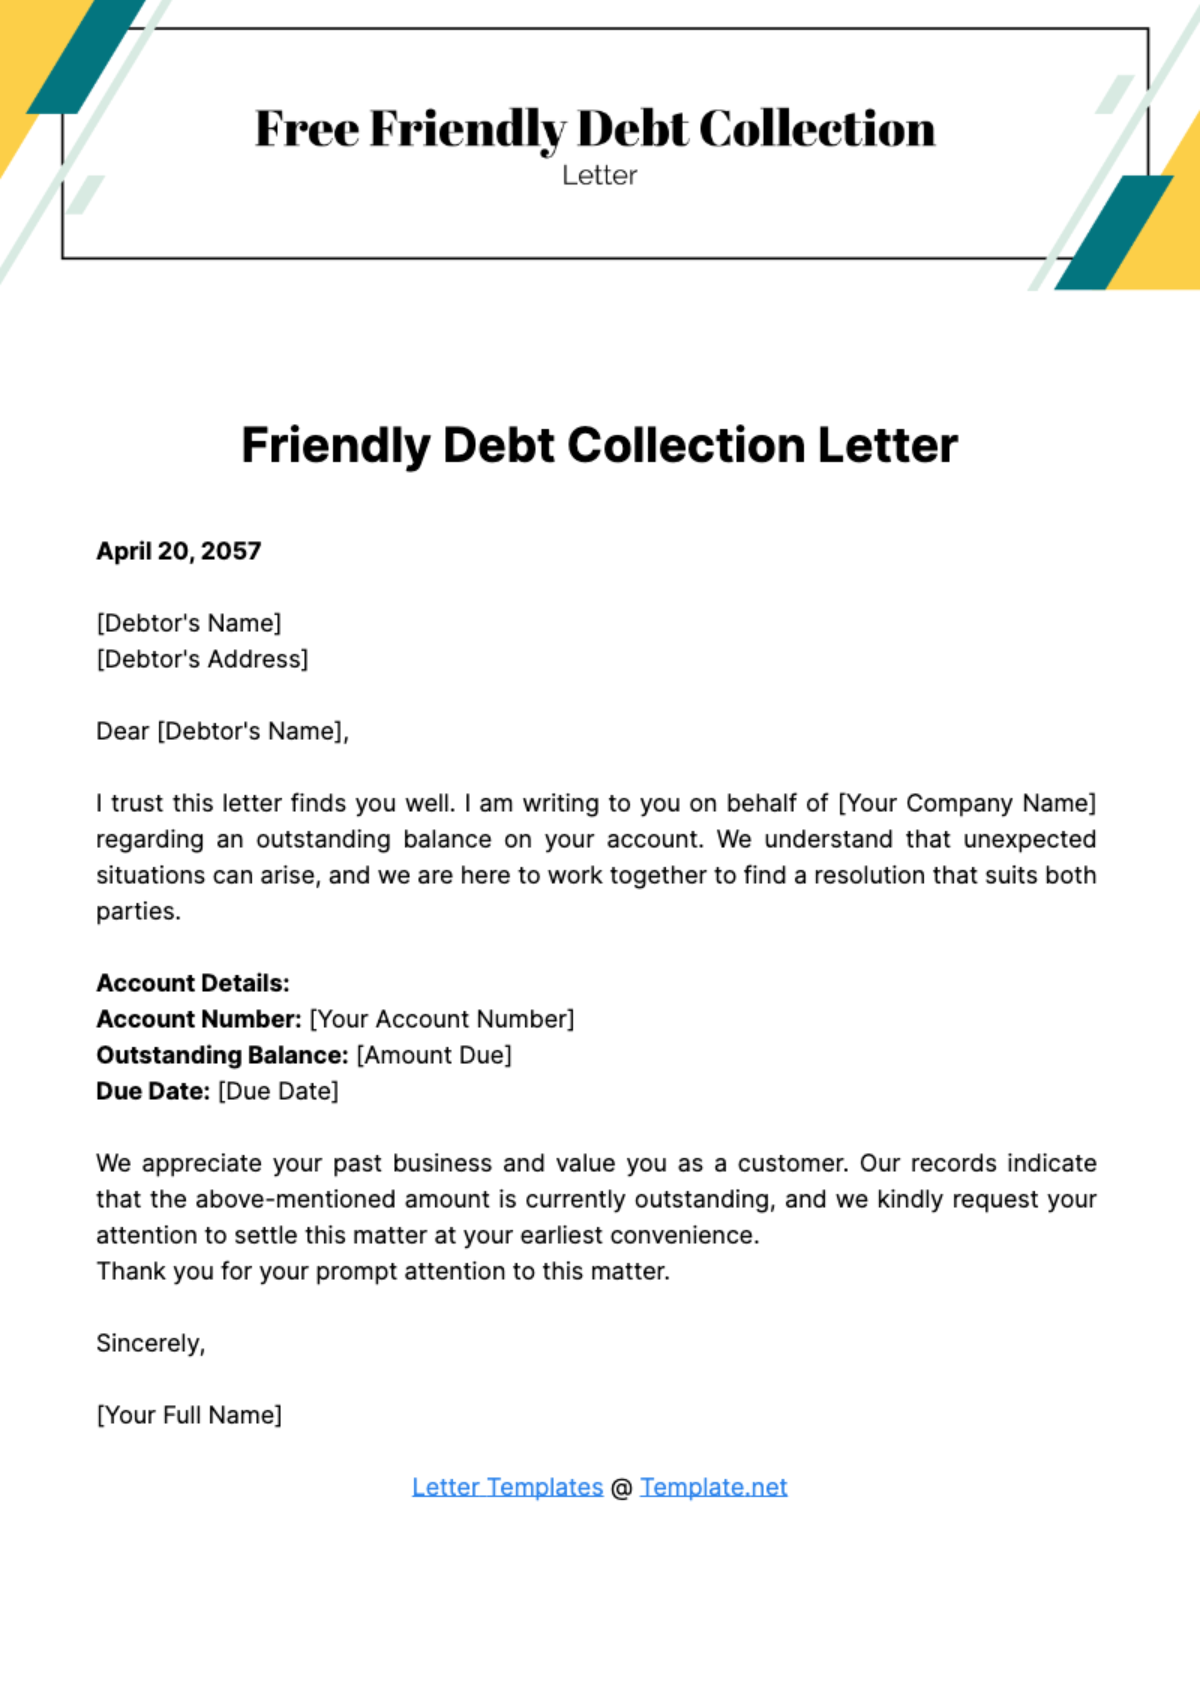 Free Friendly Debt Collection Letter Template